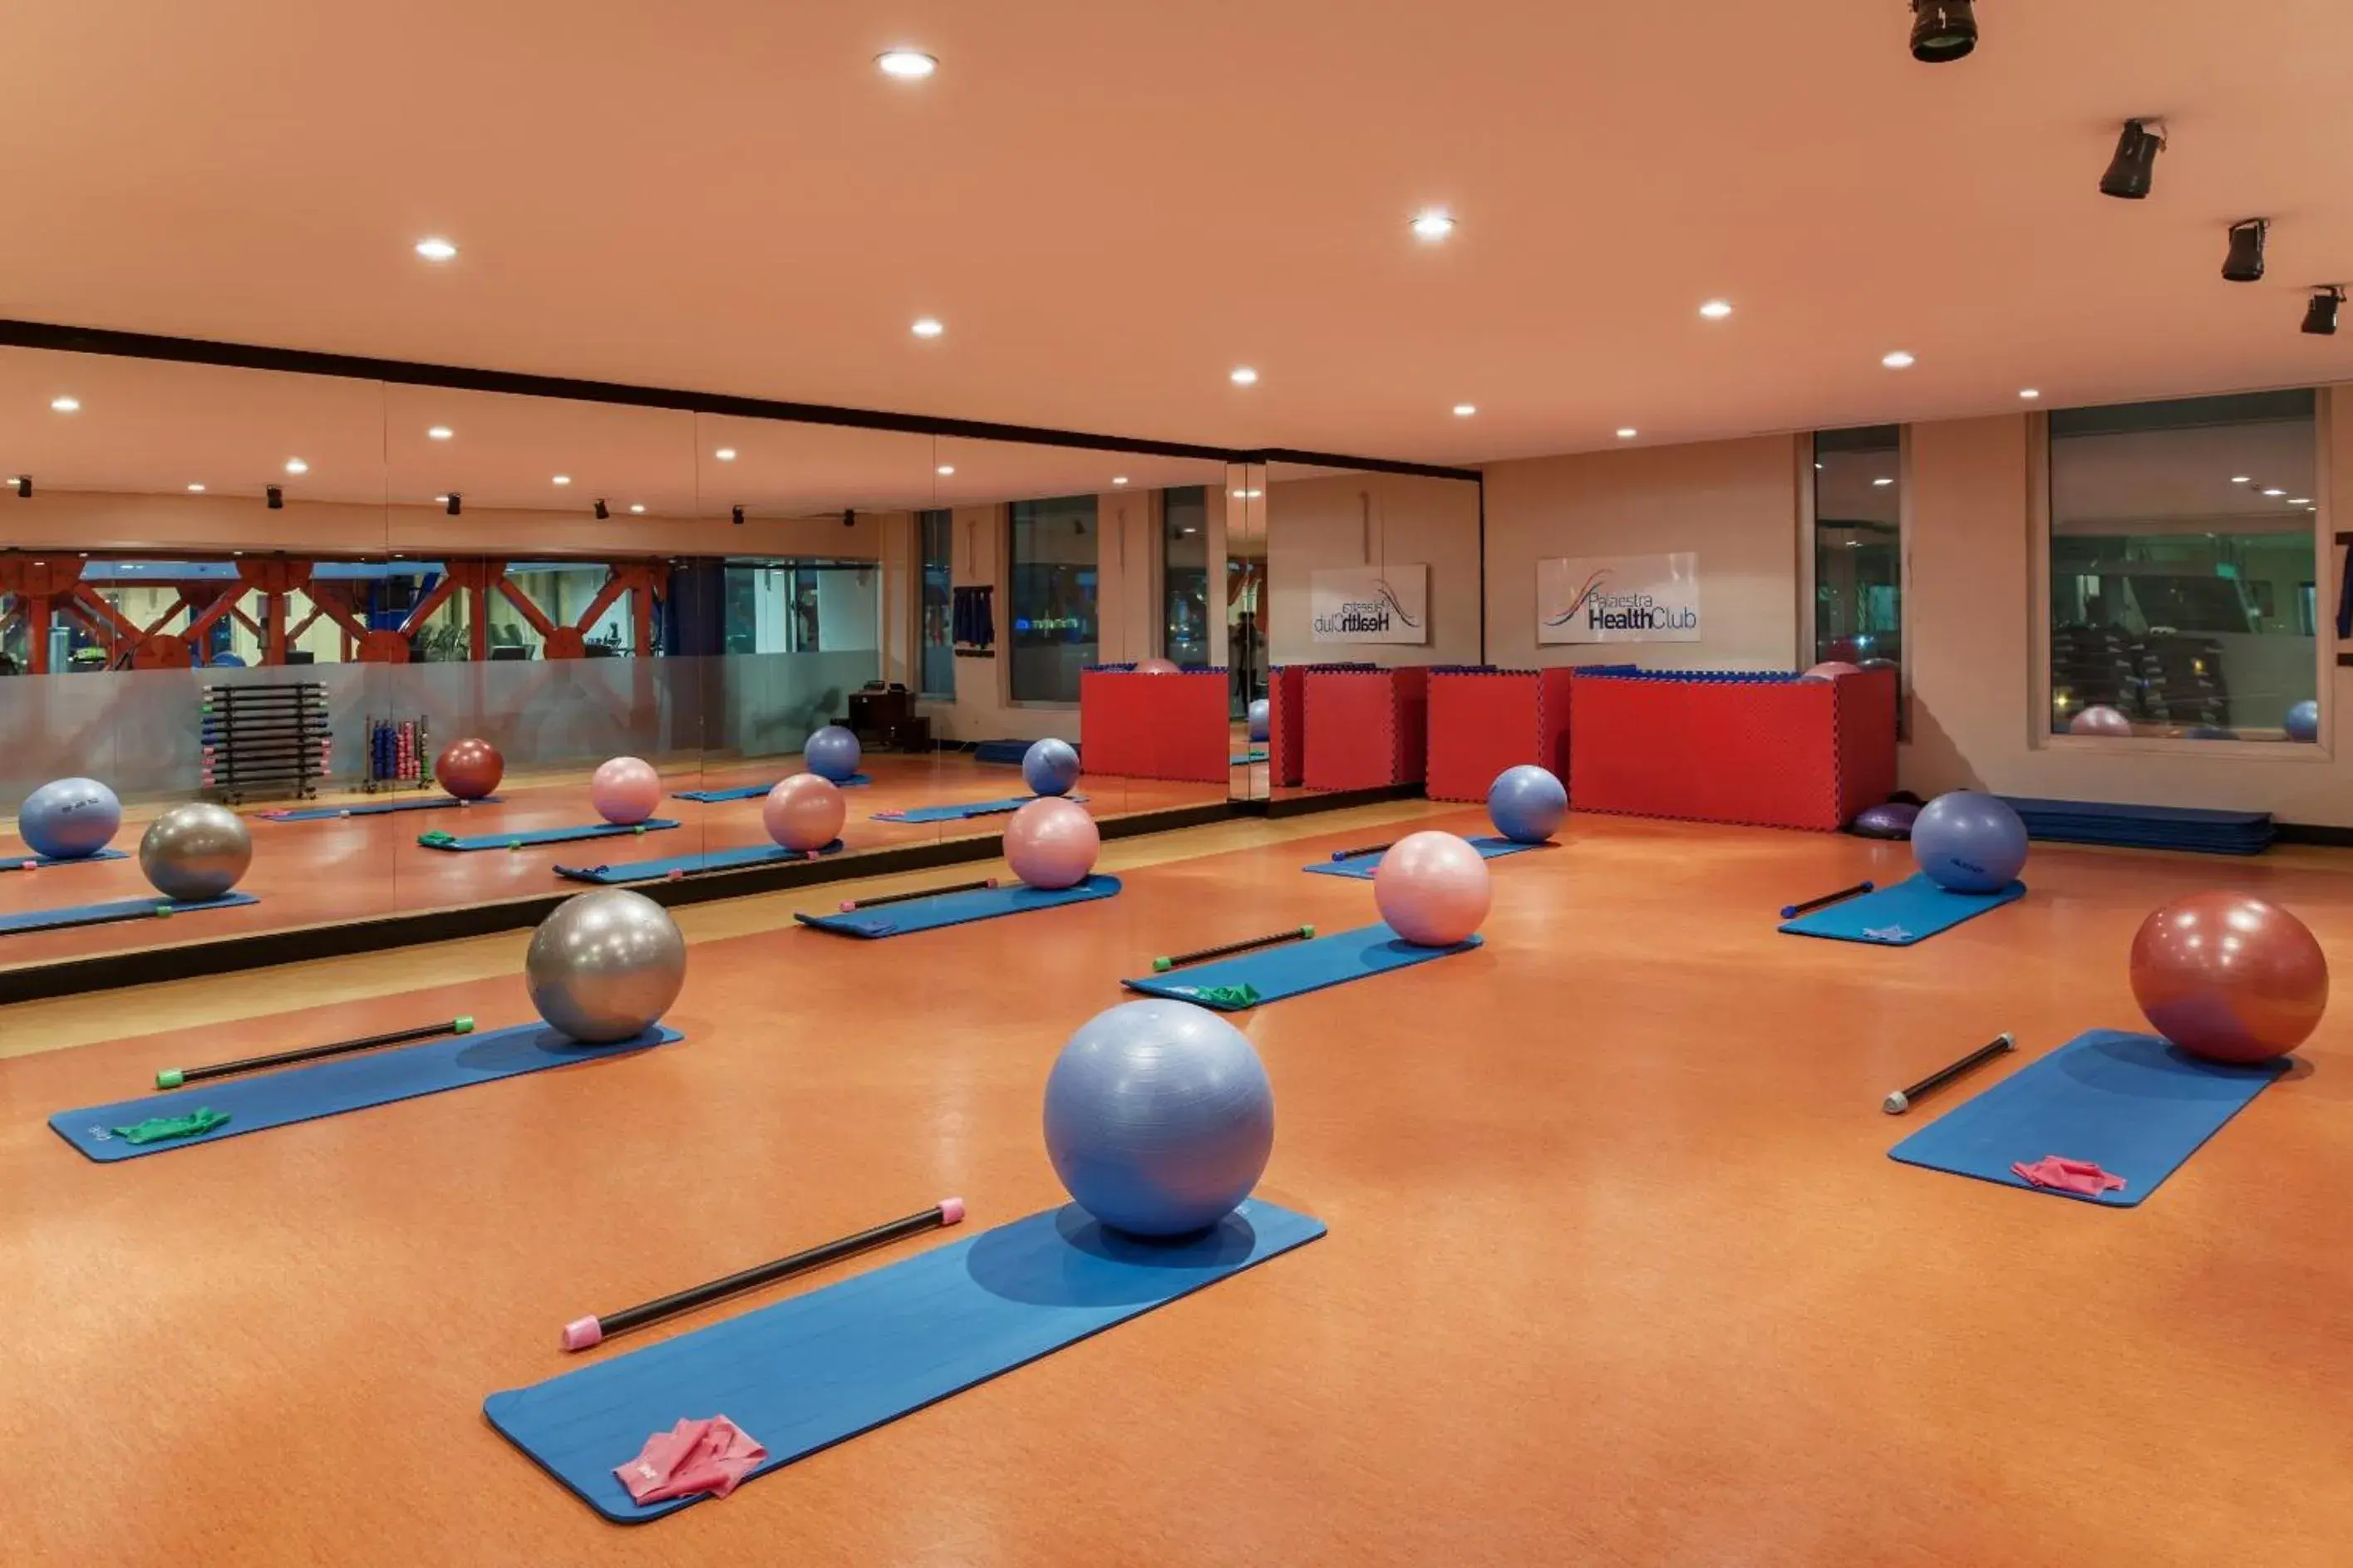 Fitness centre/facilities, Fitness Center/Facilities in Kaya İstanbul Fair & Convention